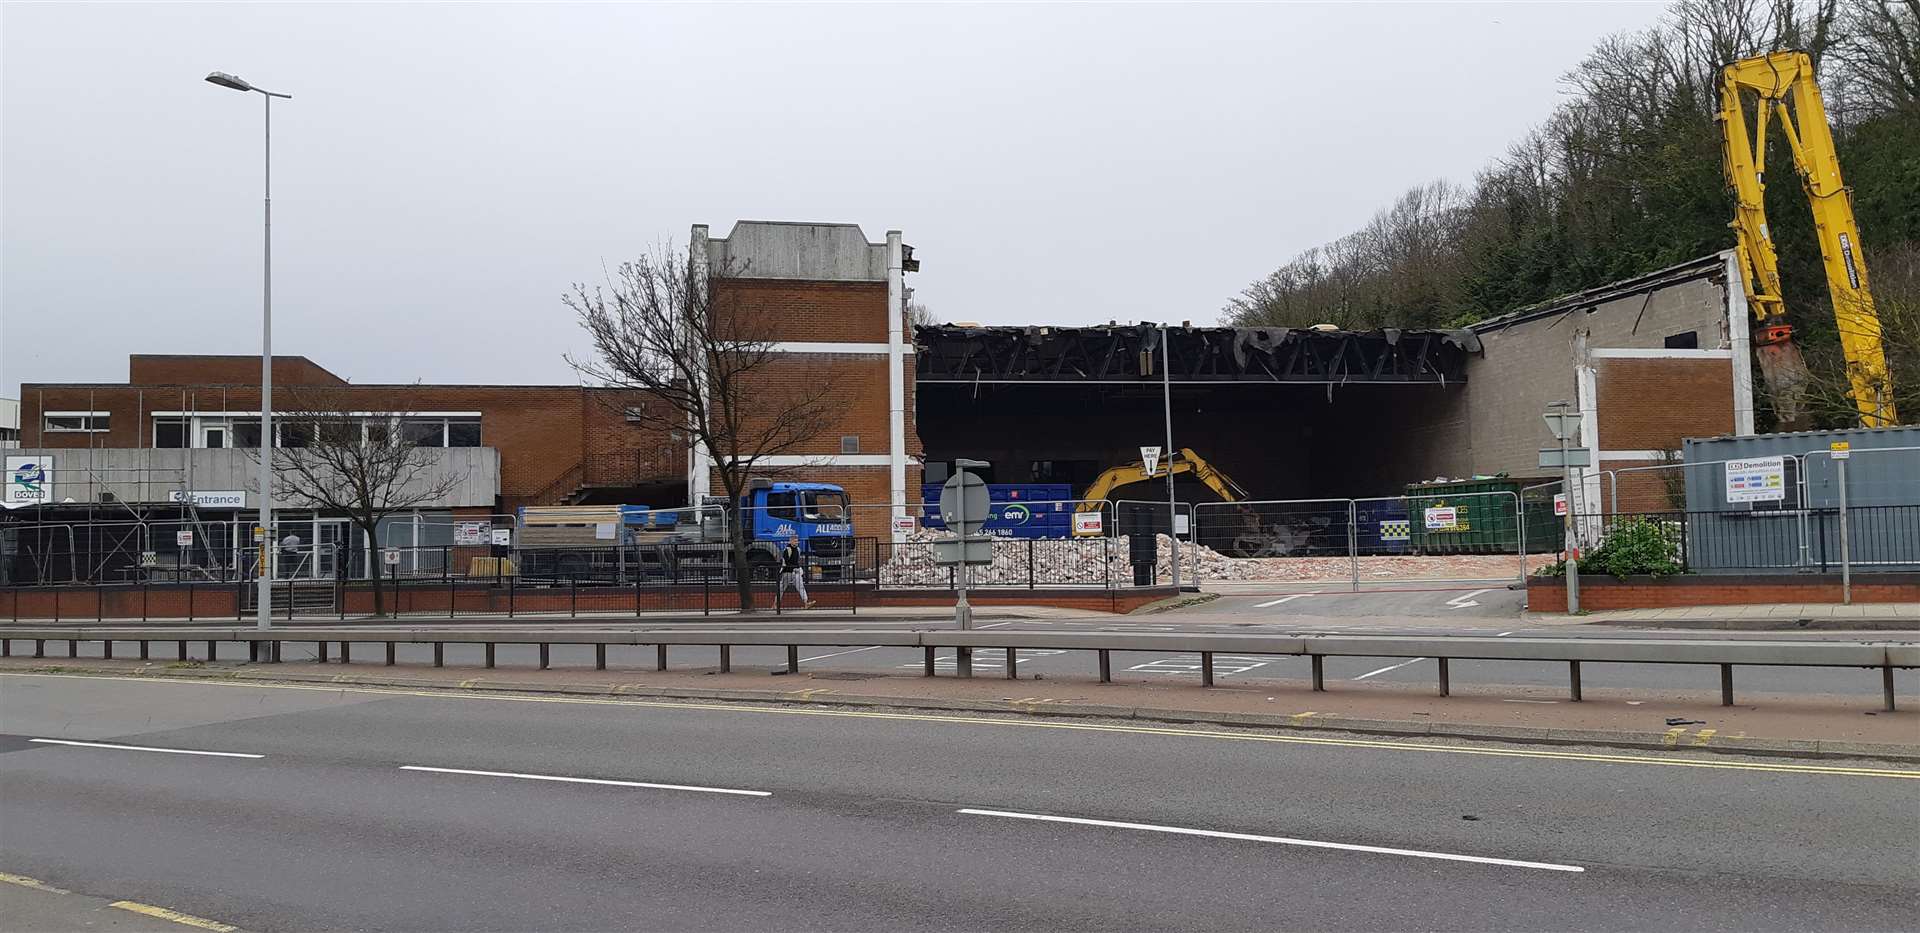 The old sports centre beginning to disappear